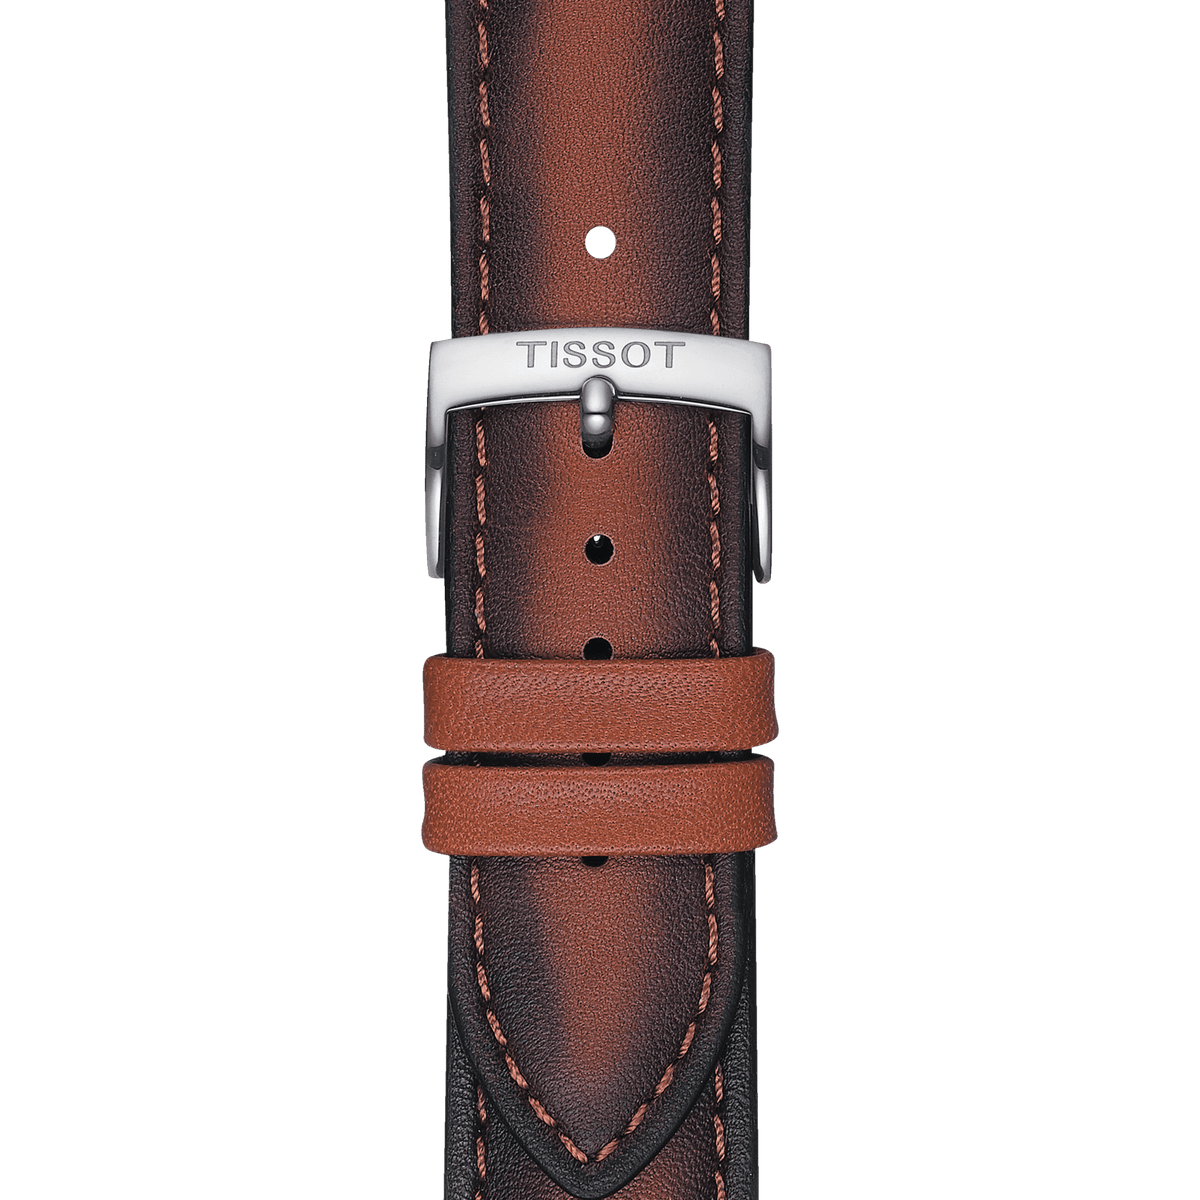 TISSOT OFFICIAL BEIGE LEATHER STRAP LUGS 20 MM